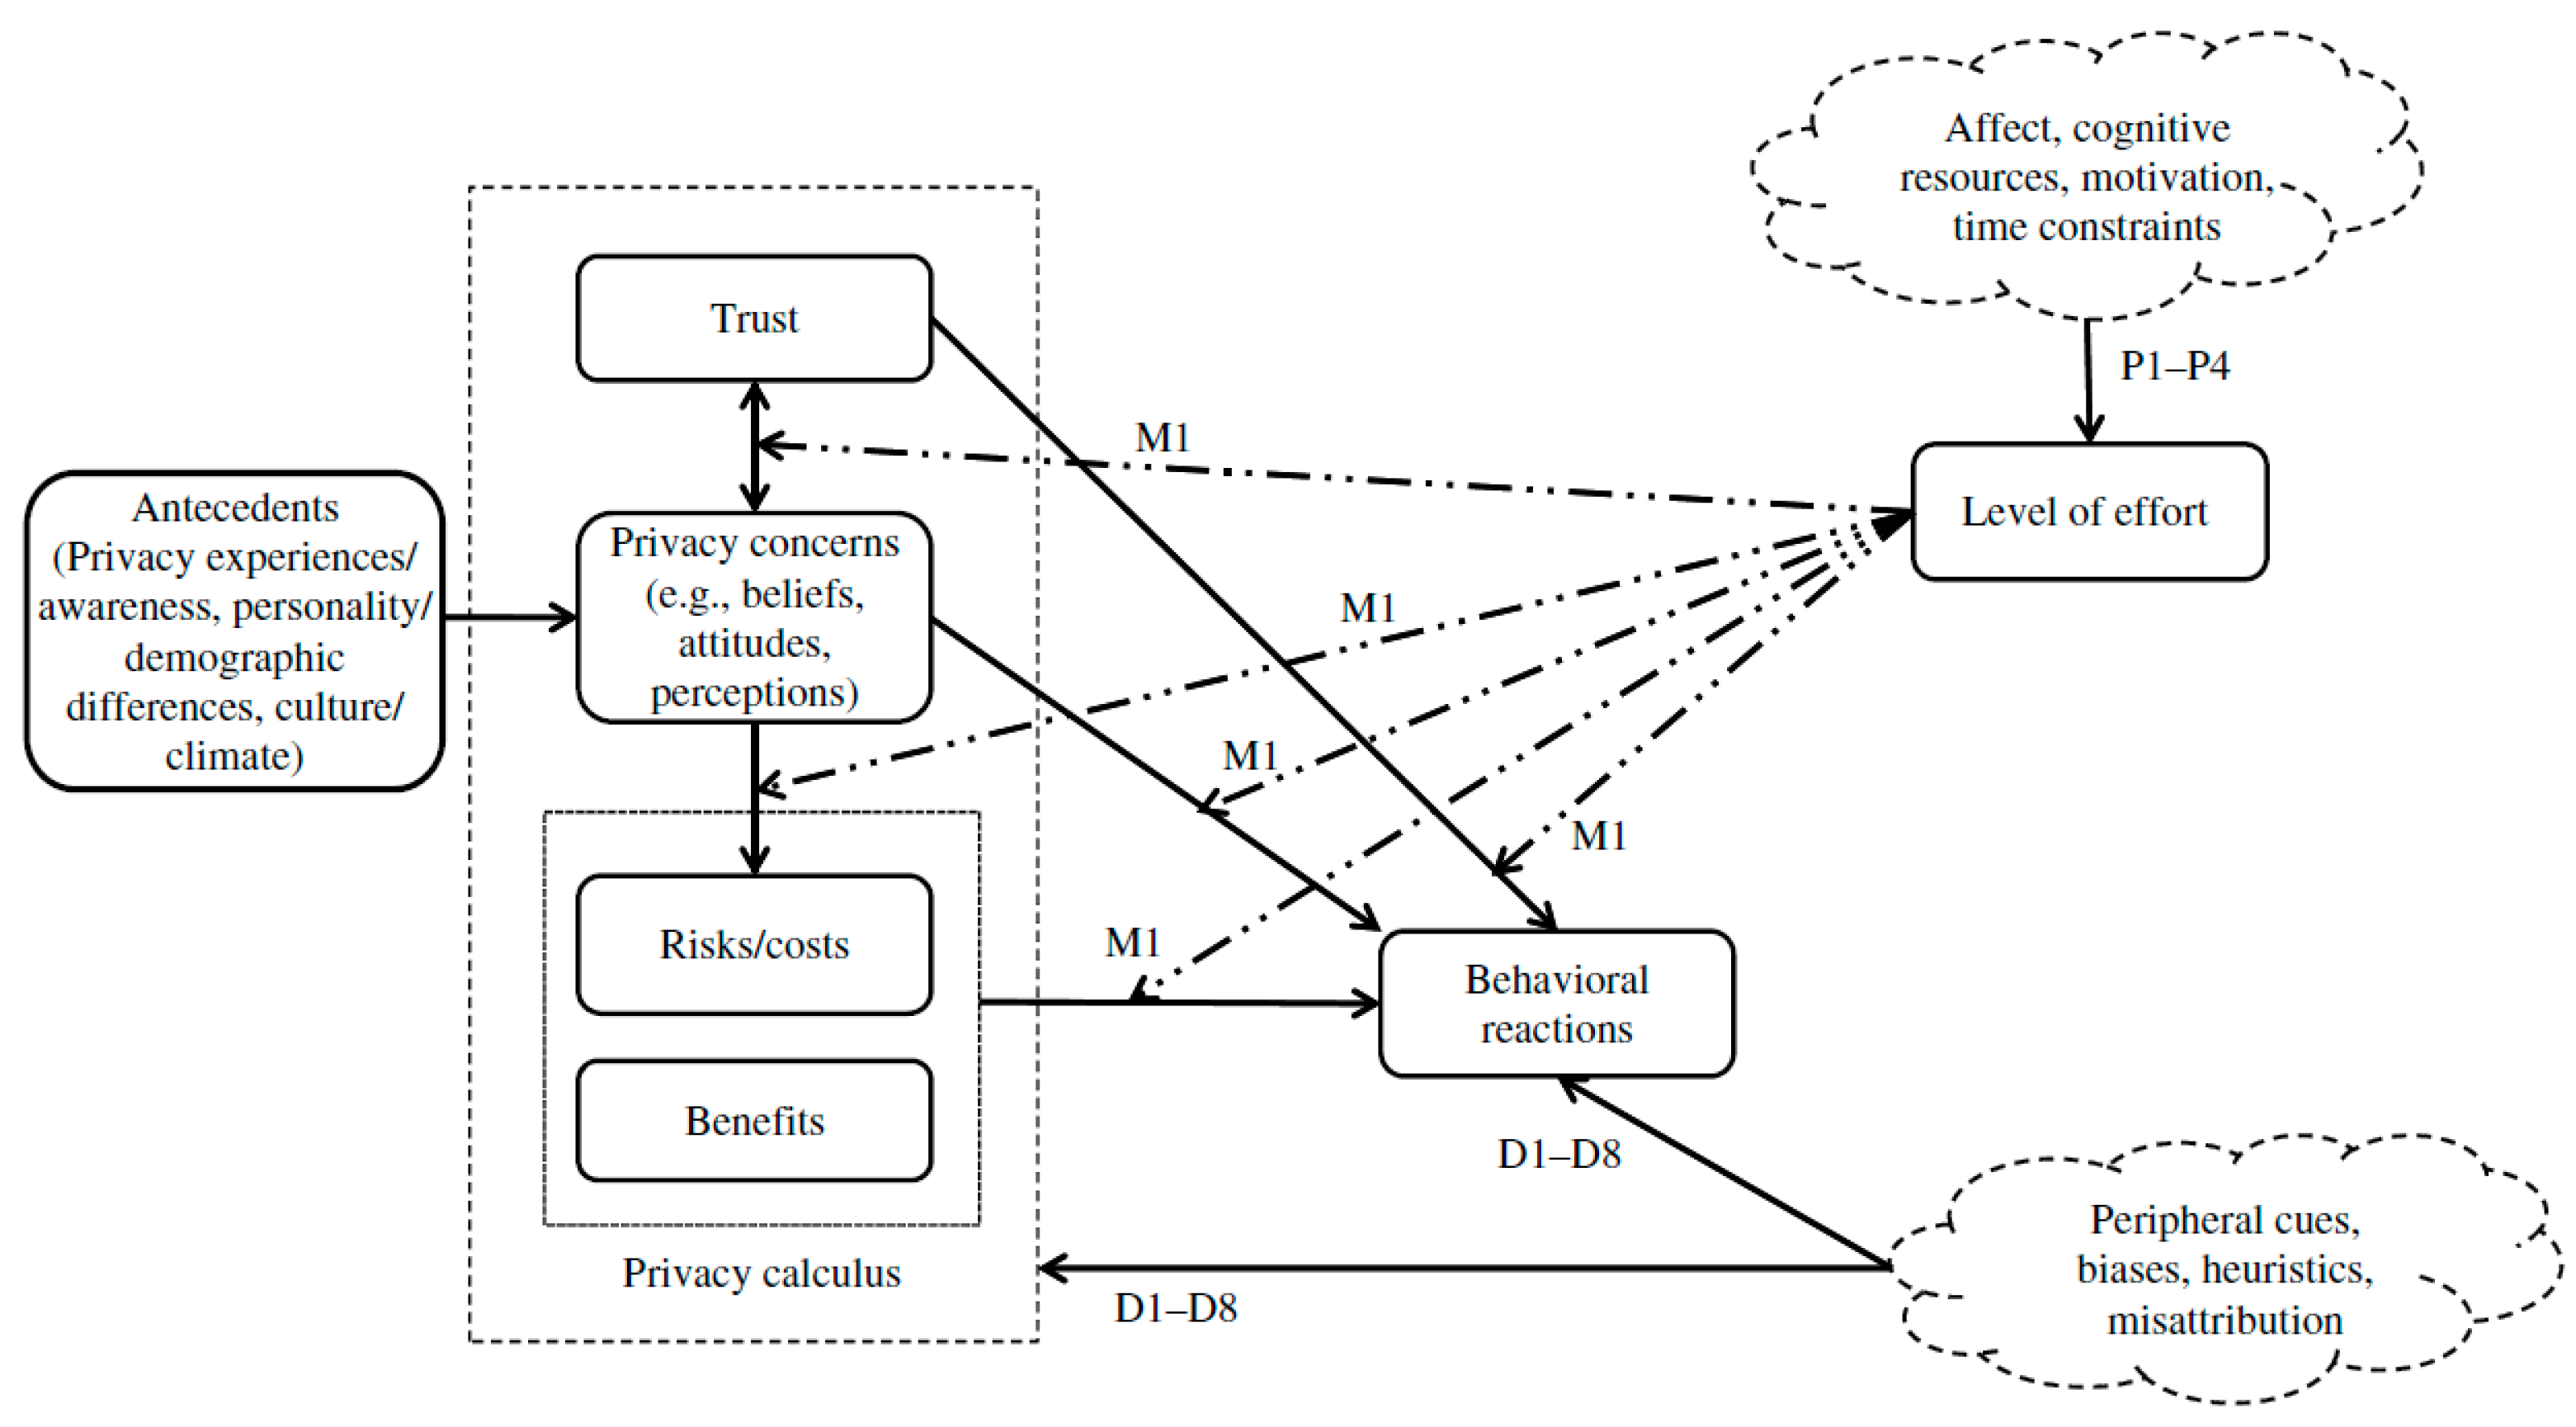 Form, fit, and function modeled personal information disclosure